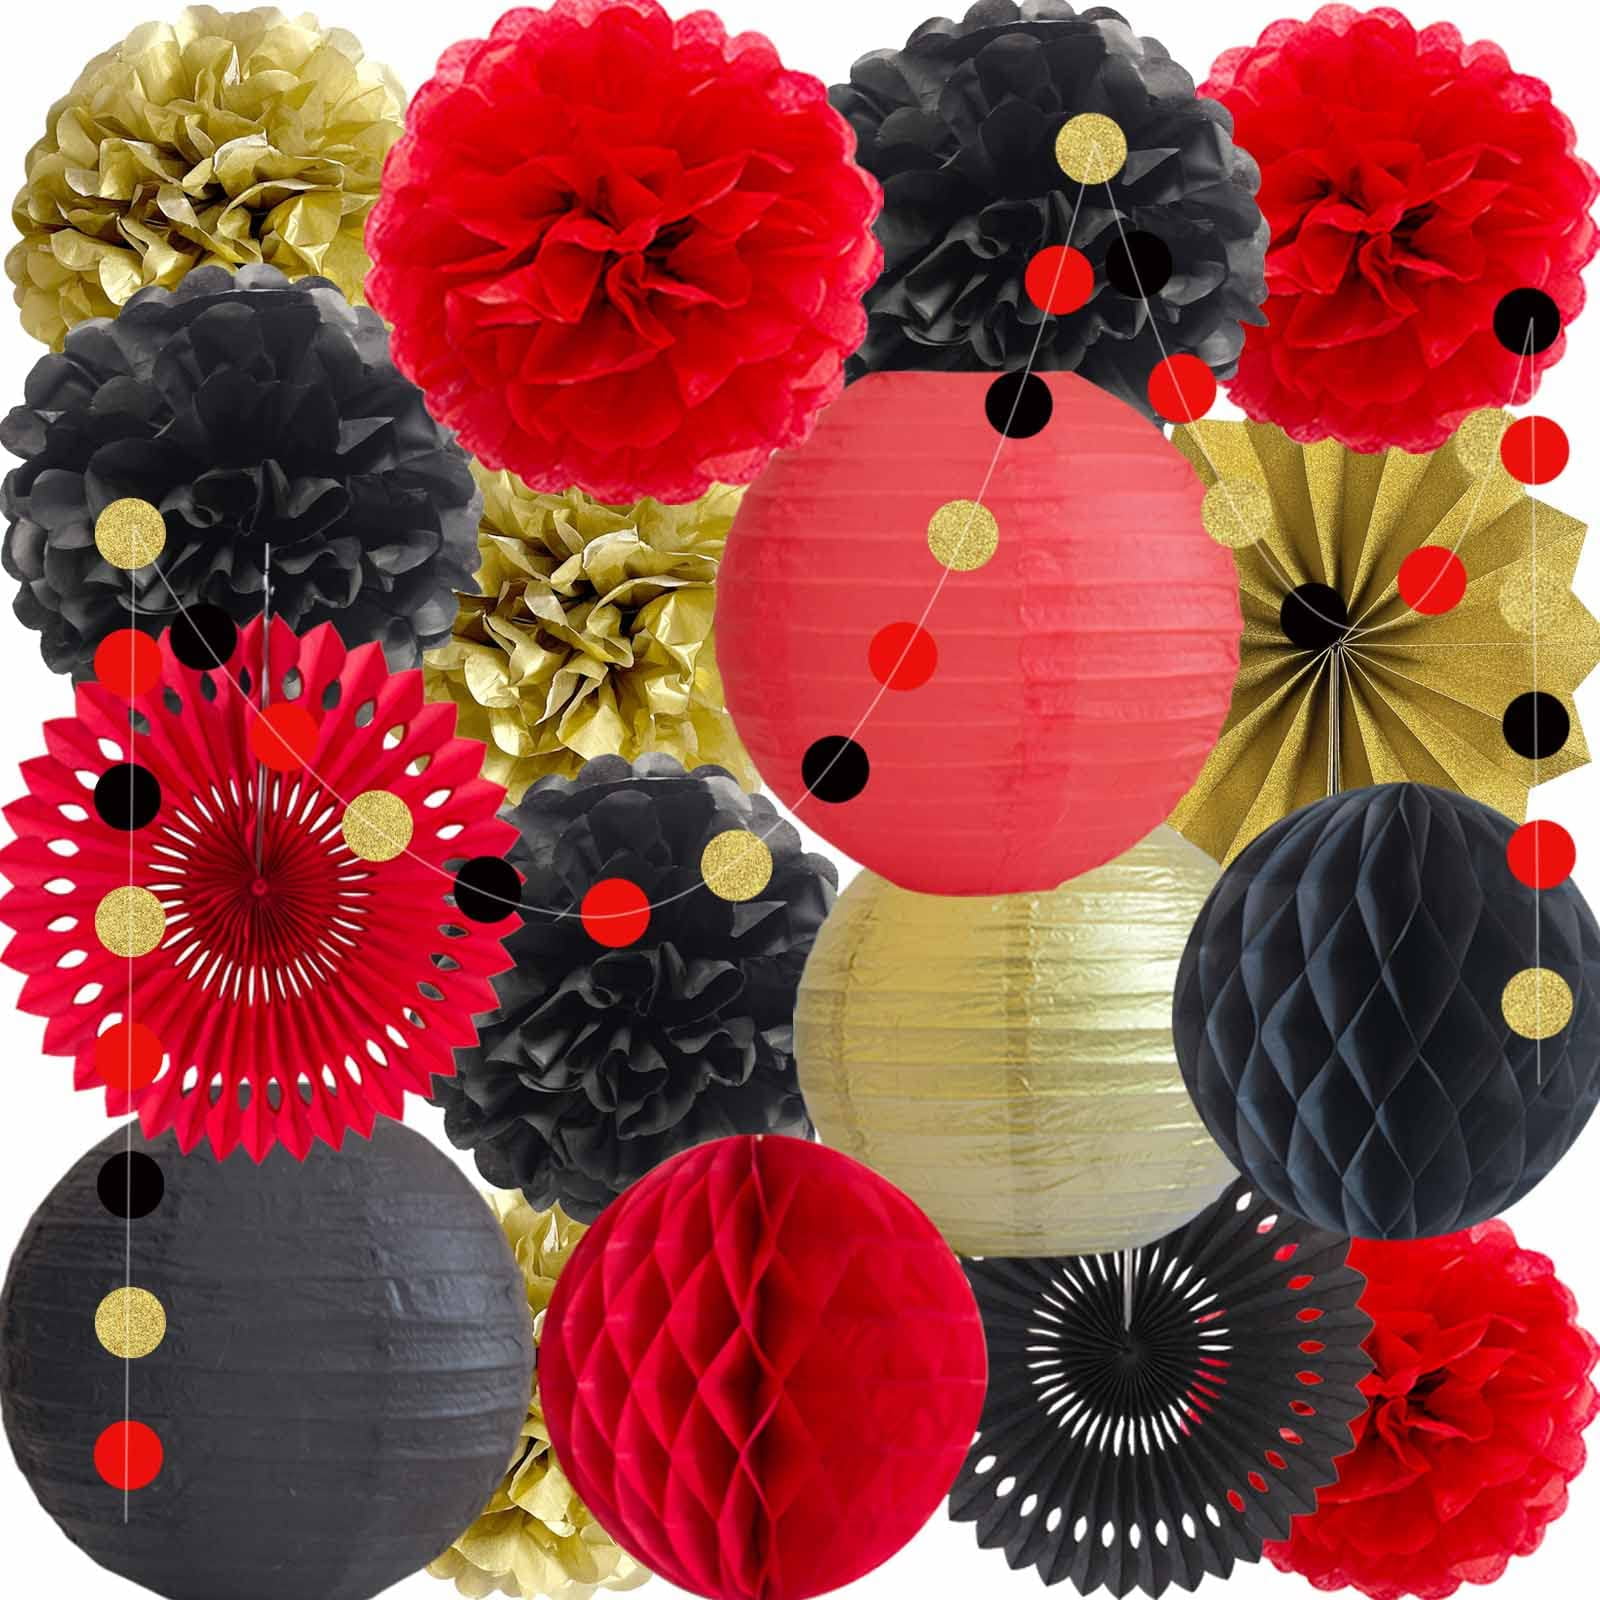 lihoota black and gold party decorations - masquerade and birthday party  decorations with diy paper pom poms flowers, tassel garland